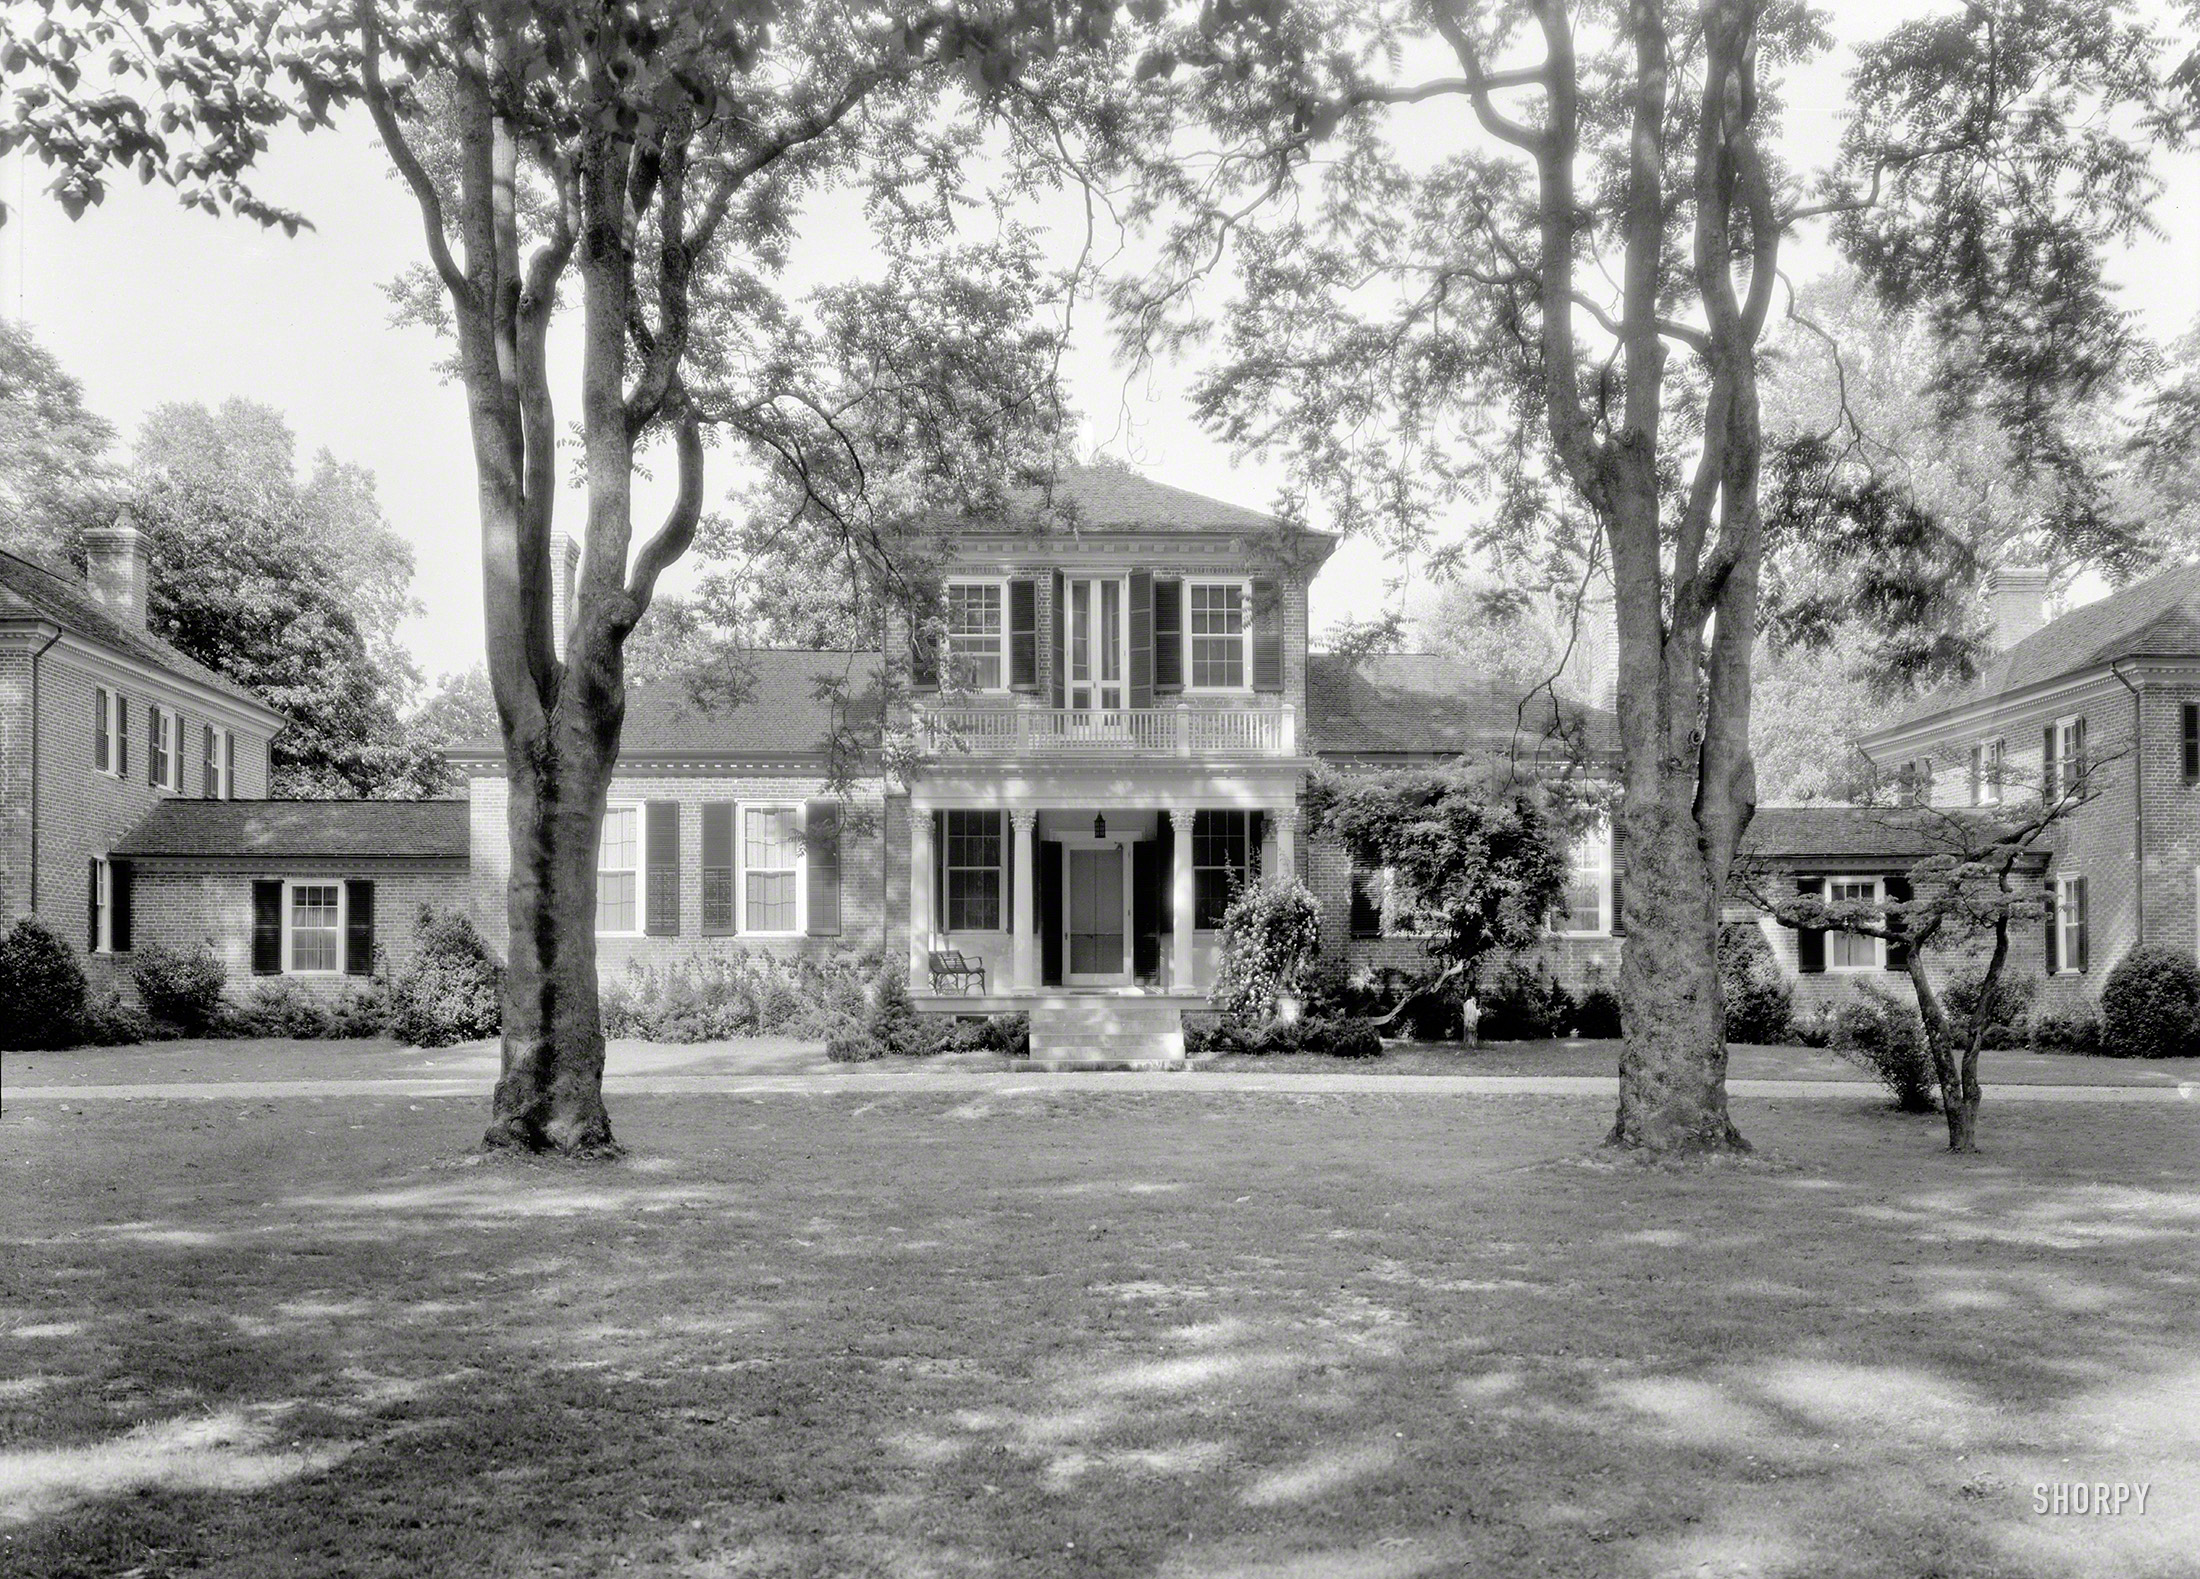 1931. "Brandon, James River, Prince George County, Virginia. Built ca. 1730 by Nathaniel Harrison II and for two centuries the home of the Harrison family. The central block connecting the two older wings is supposed to have been designed by Thomas Jefferson in 1789 upon his return from France." 8x10 inch acetate negative by Frances Benjamin Johnston. View full size.